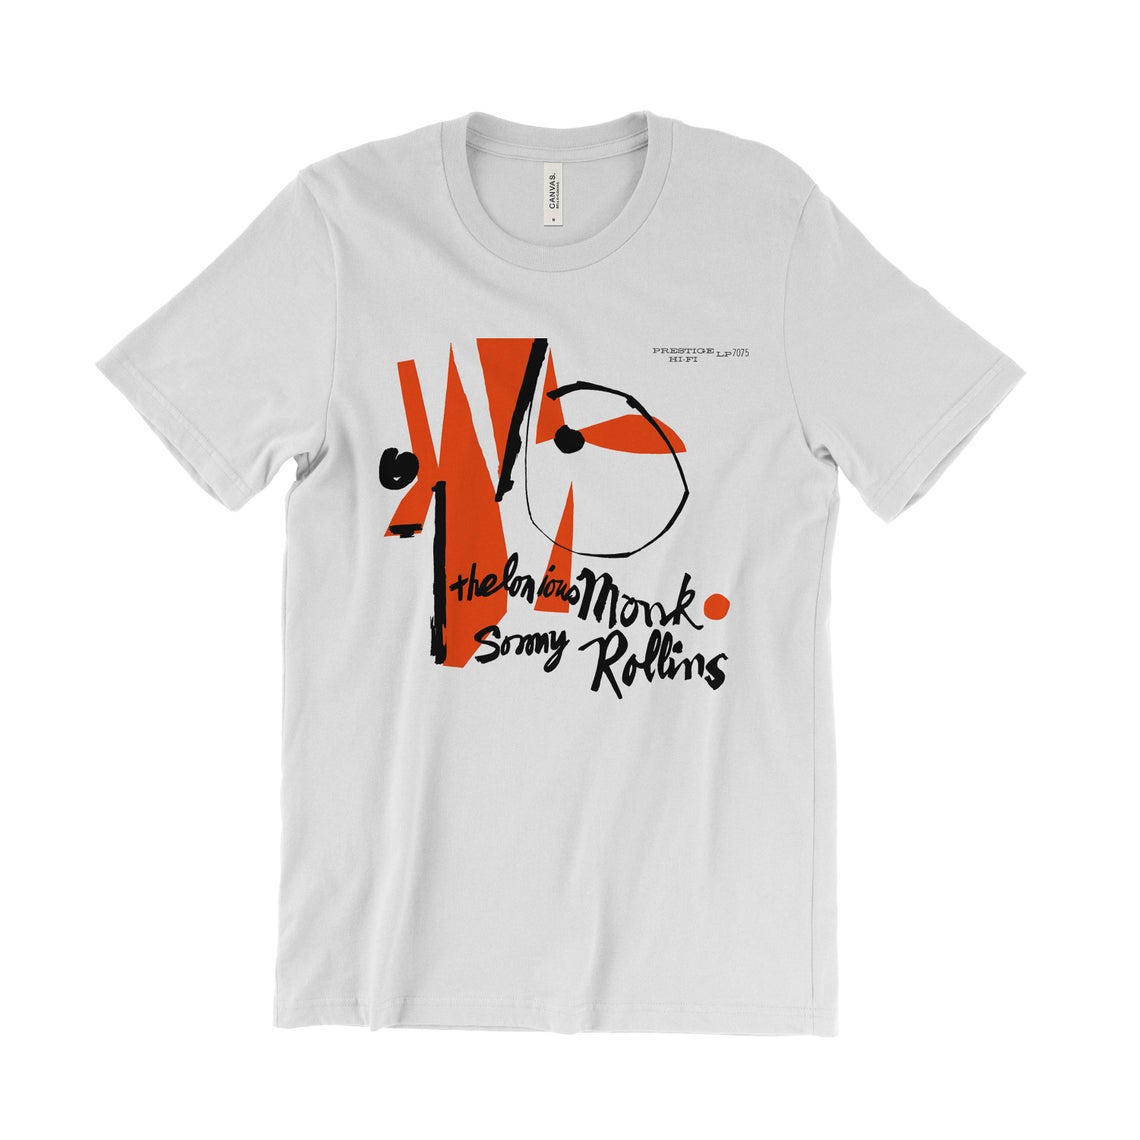 Thelonious-Monk-and-Sonny-Rollins-T-Shirt